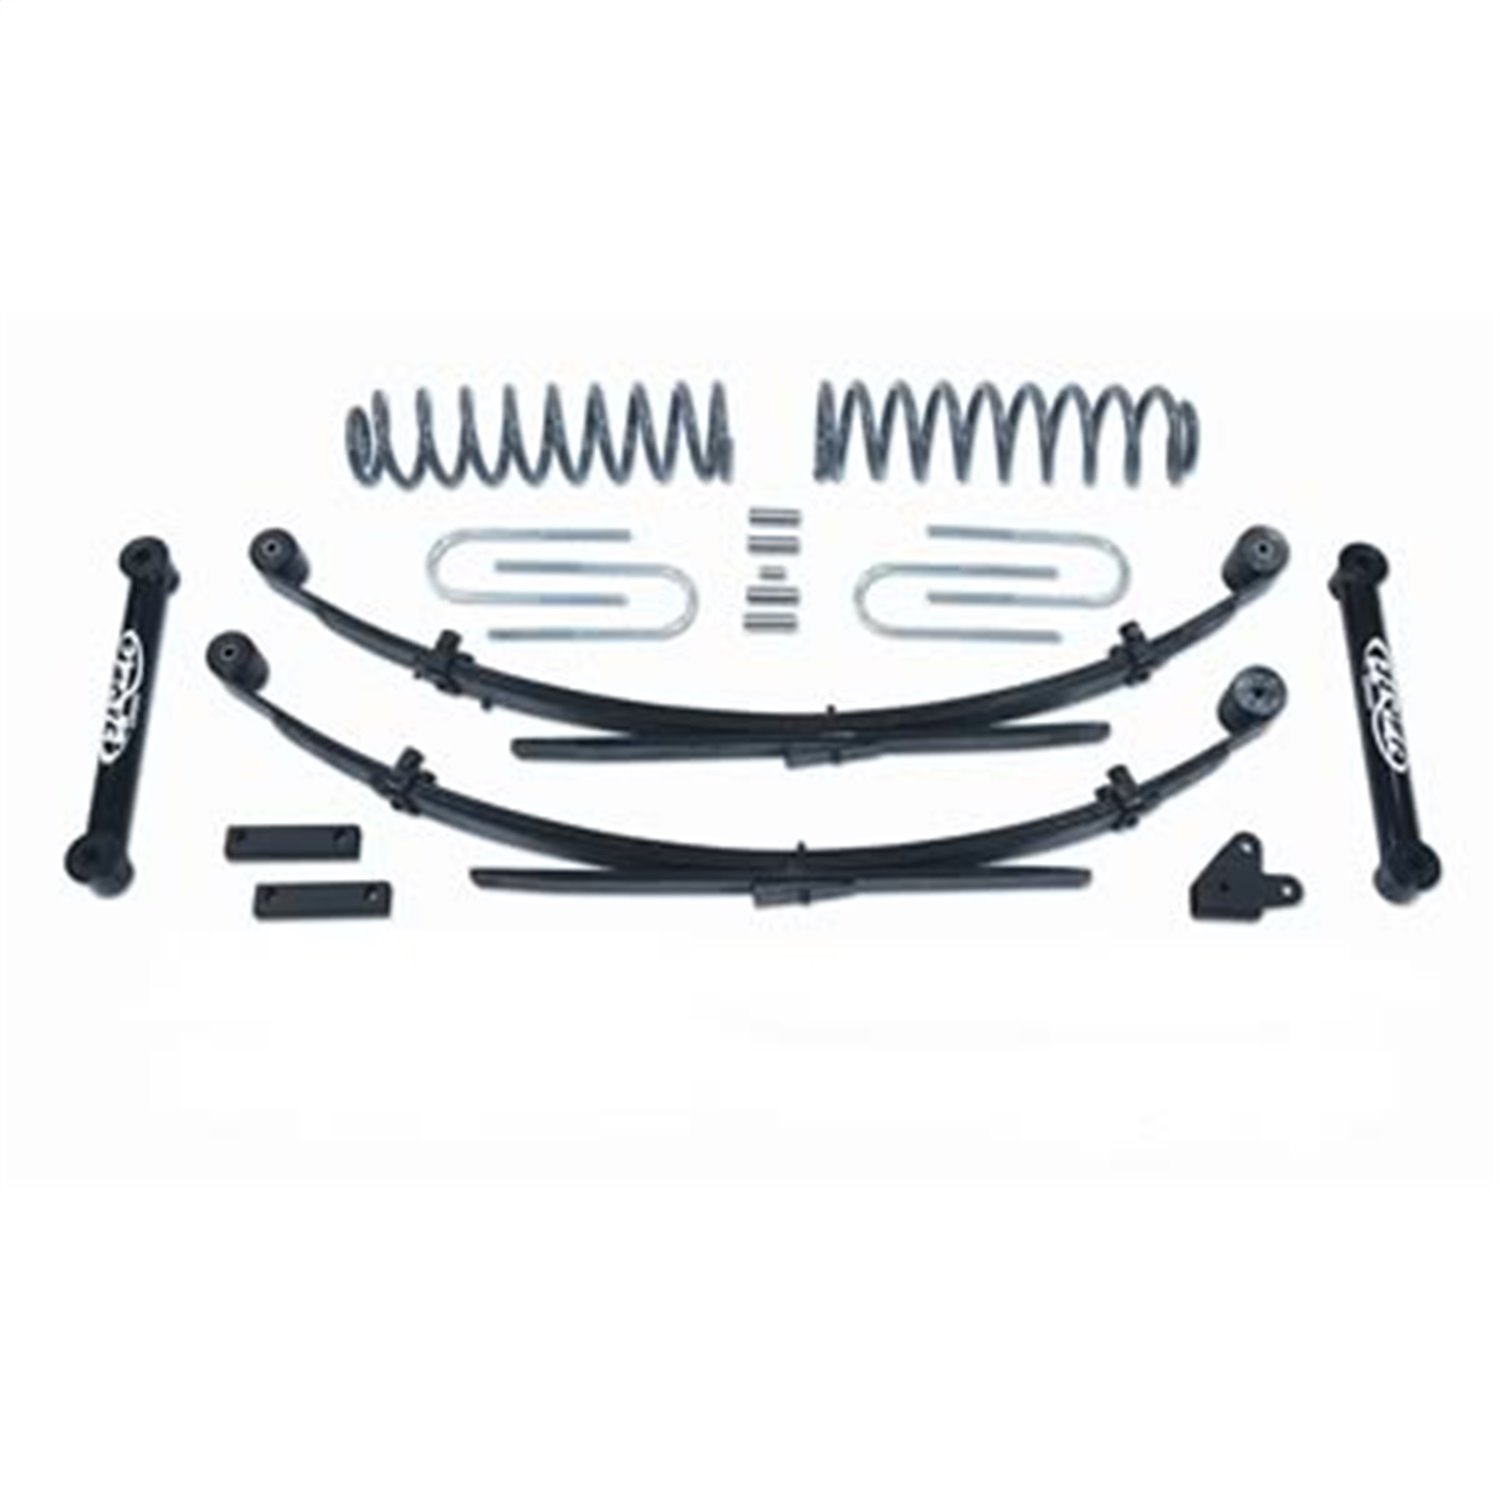 Suspension Lift Kit with Standard Control Arms 1987-2001 Jeep Cherokee XJ